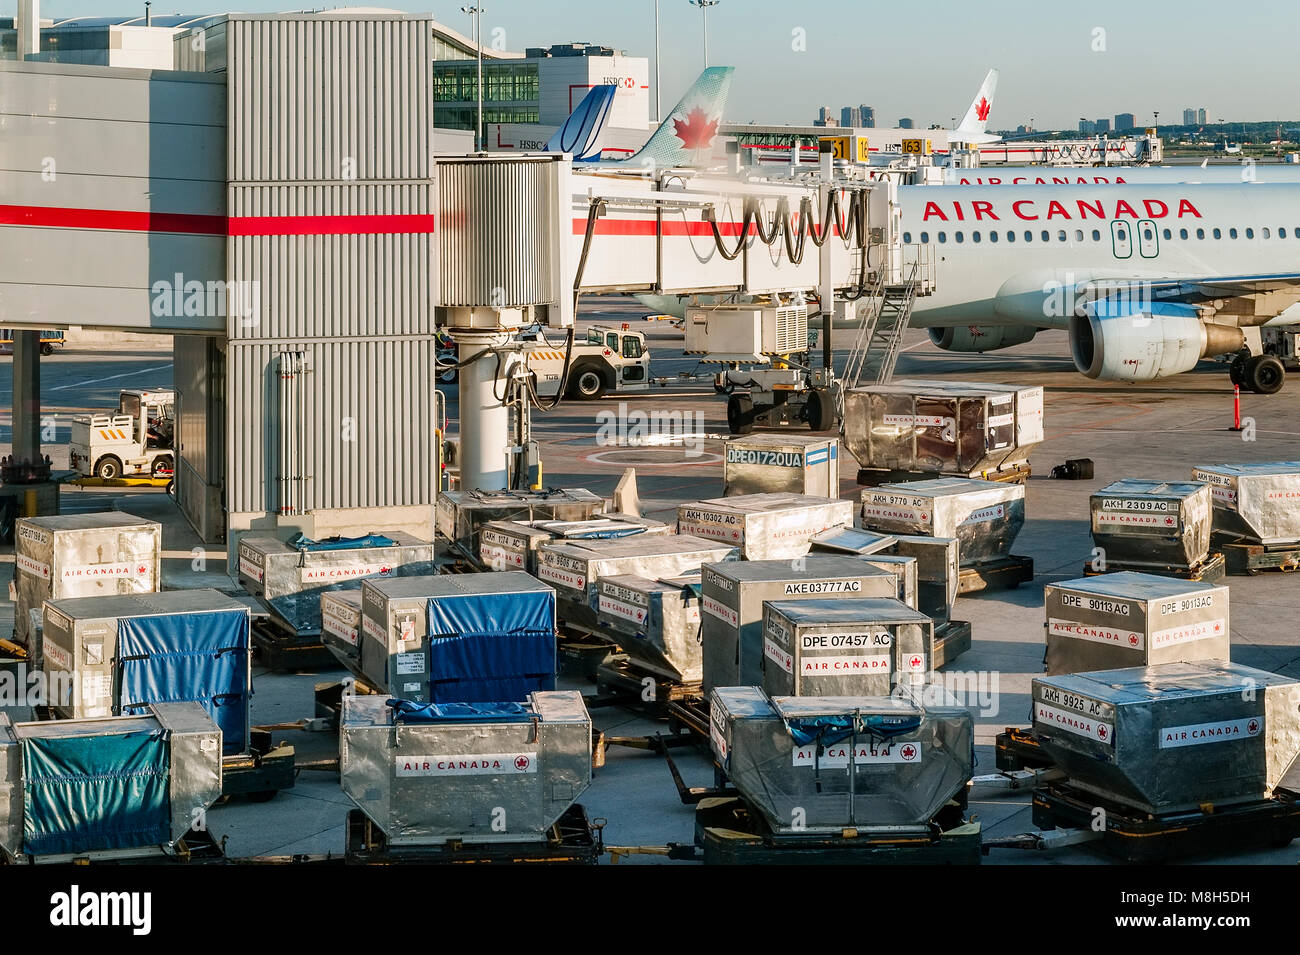 Loading planes at Vancouver International Airport, British Colombia, Canada. Stock Photo